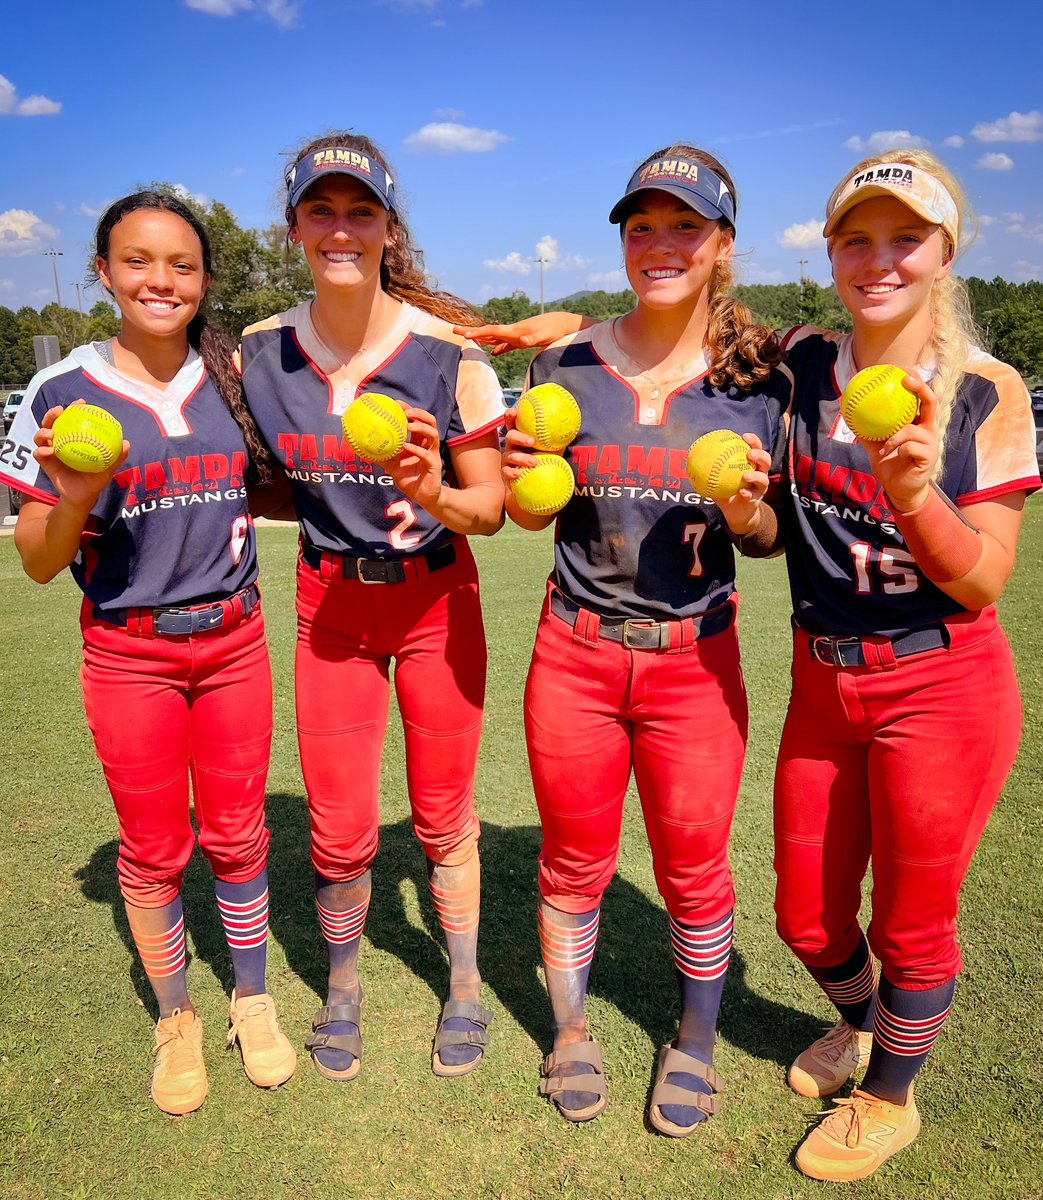 🚨BOMB SQUAD DAY 3️⃣🚨
@TCSFastpitch Nationals
@makenna2025 
@carly_bunnell 
@EmilieChing2024 ❌3️⃣
@makennabellaire 
@TampaMustangs 🏇💪